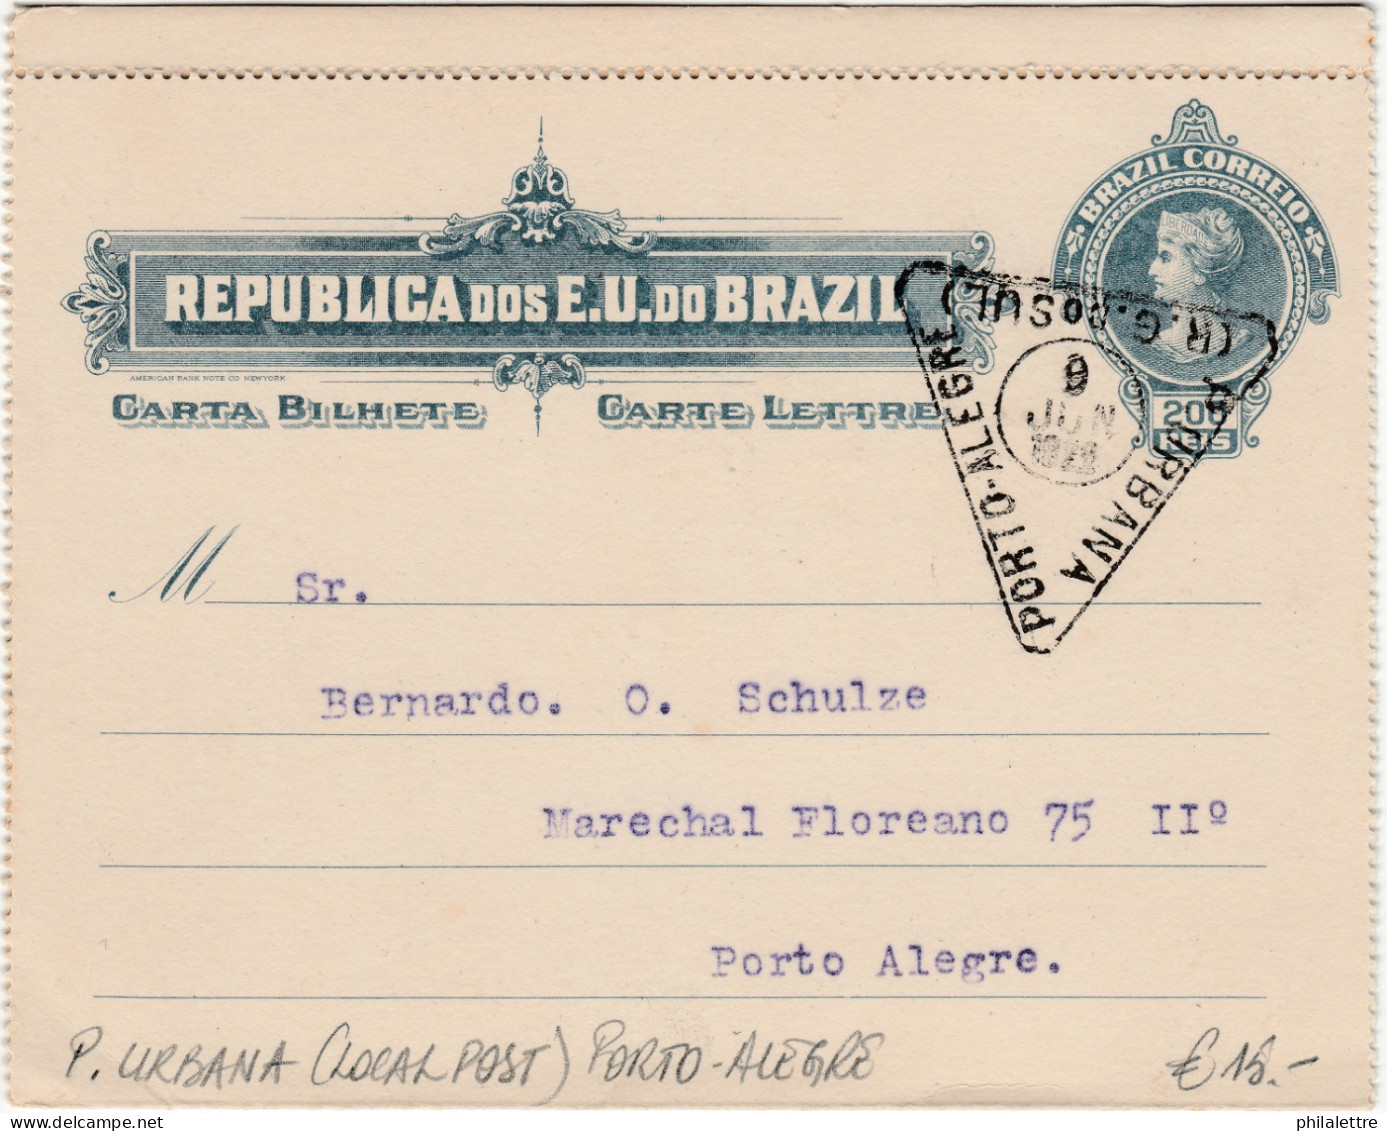 BRAZIL 1922 200 Reis Letter-Card Used In PORTO-ALEGRE Cancelled "P. URBANA" (City Post) - Covers & Documents